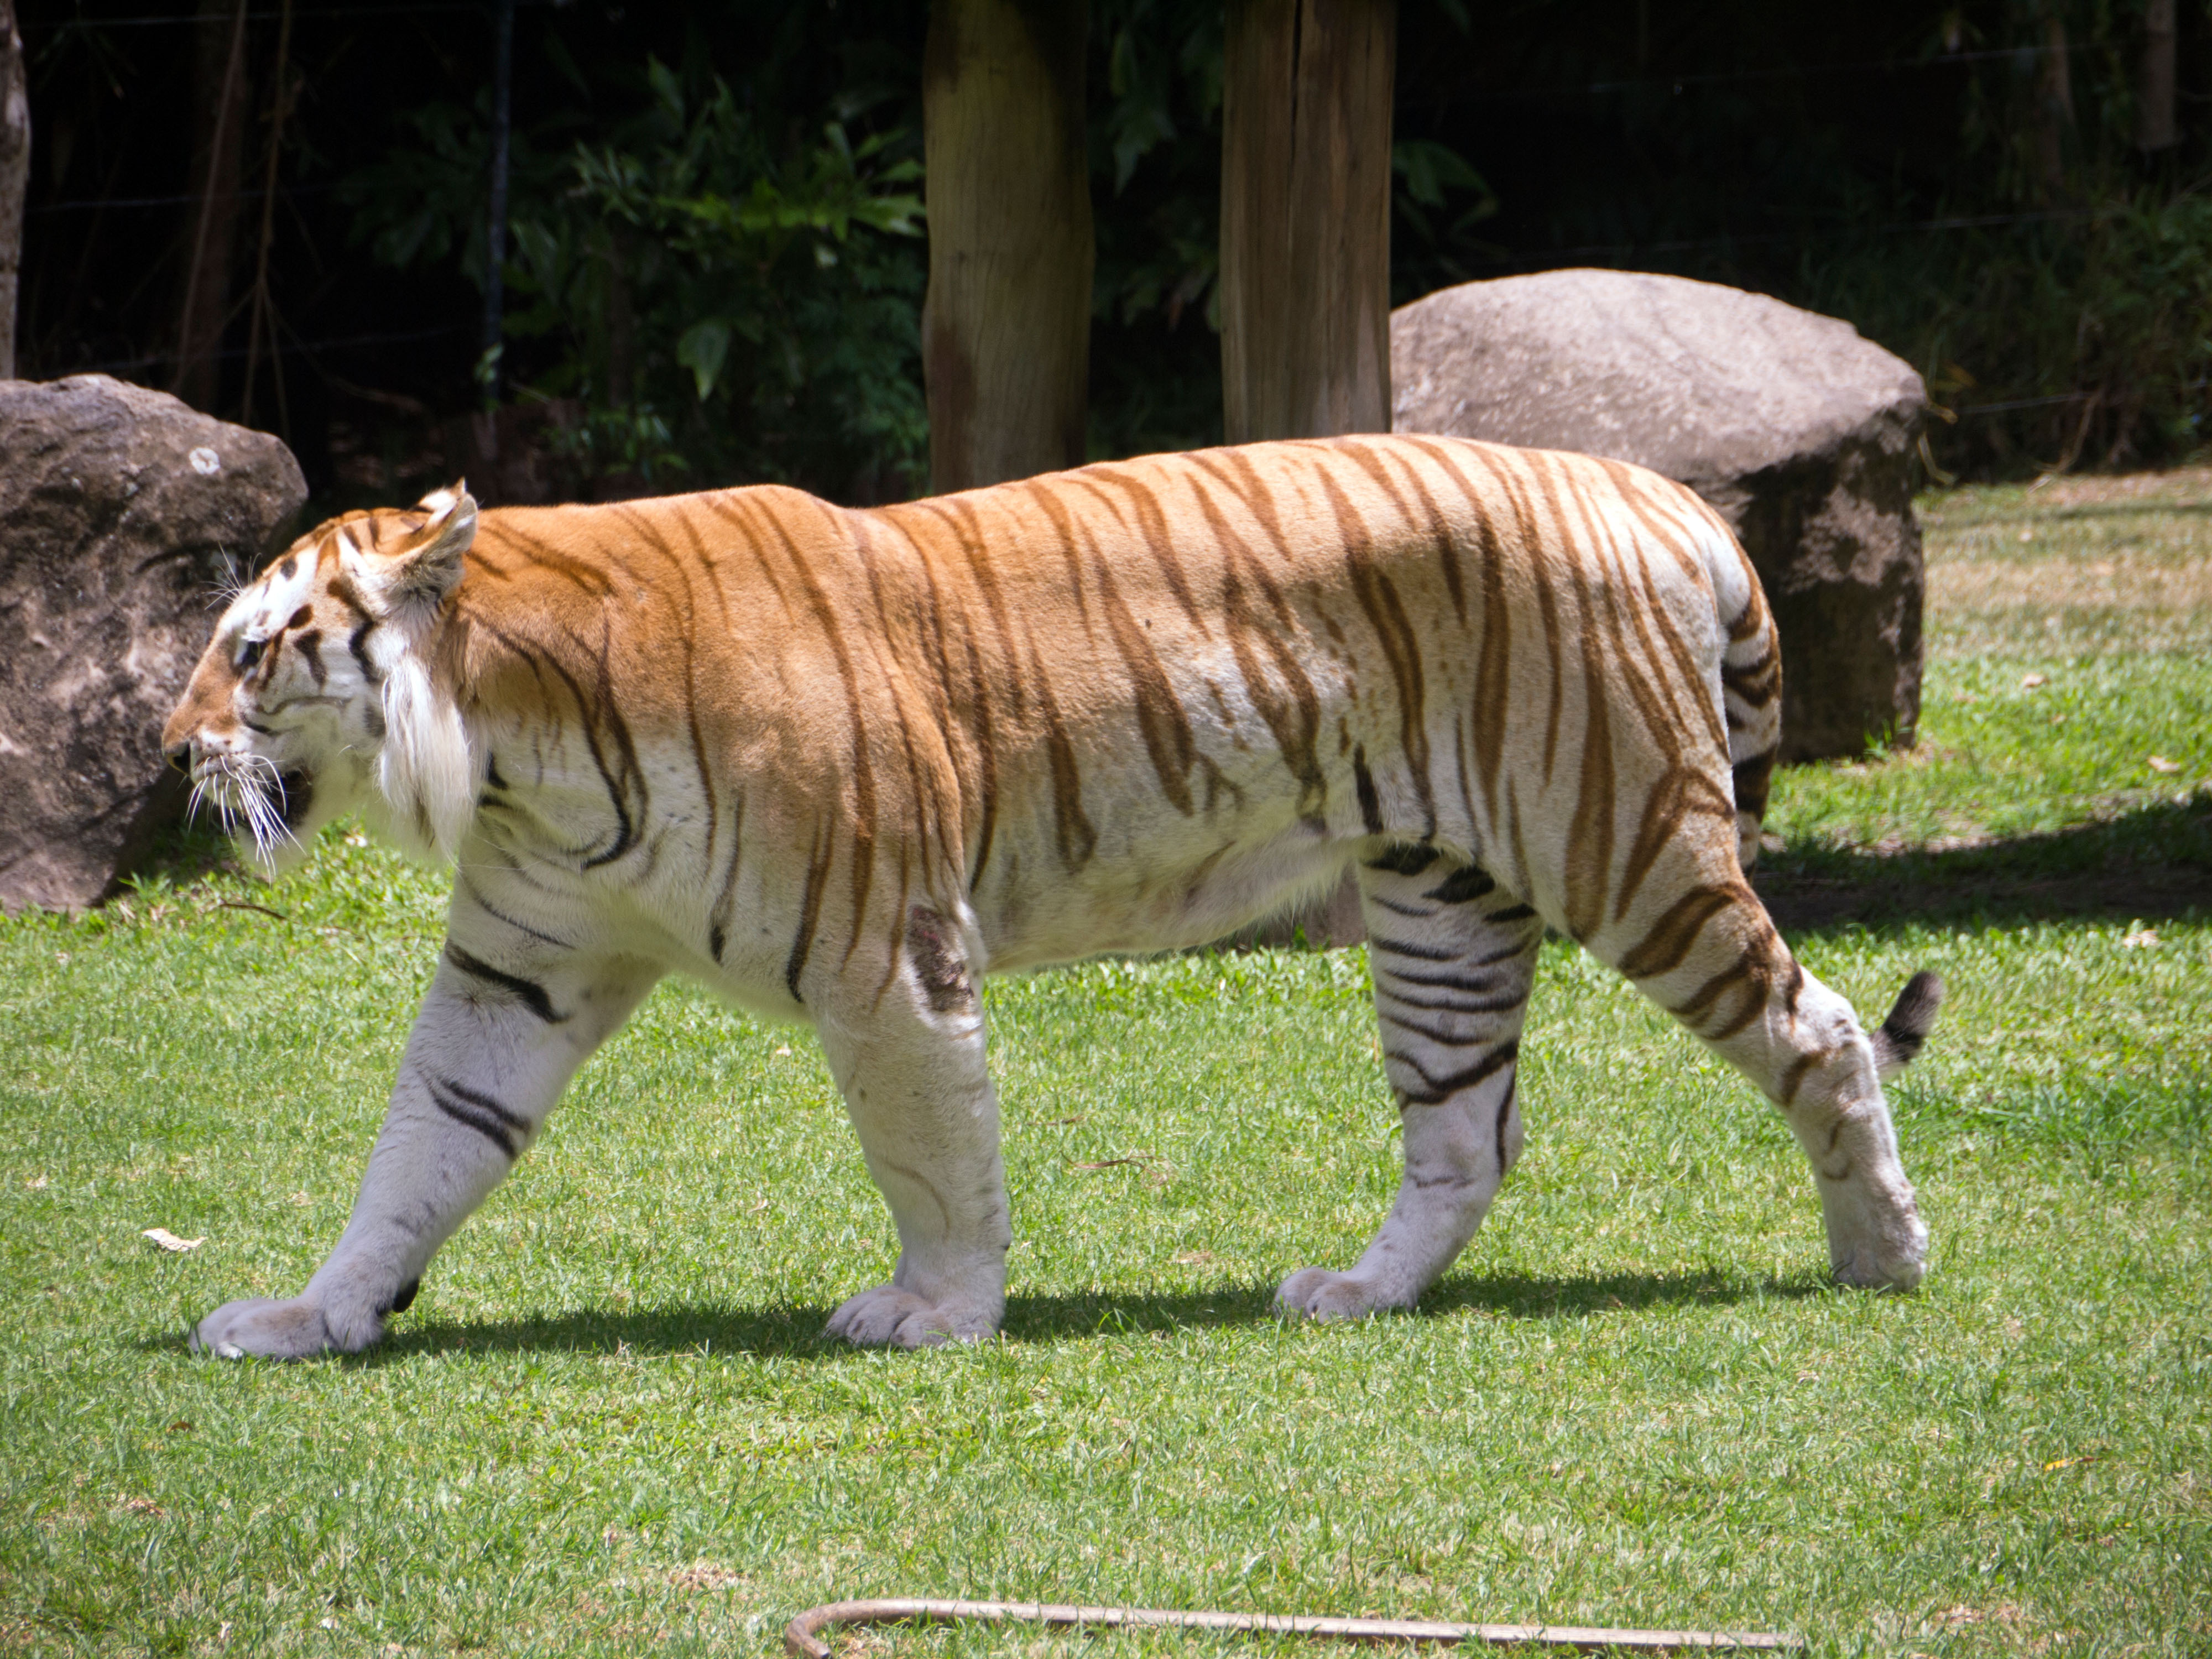 tiger with orange stripes instead of the traditional black stripes